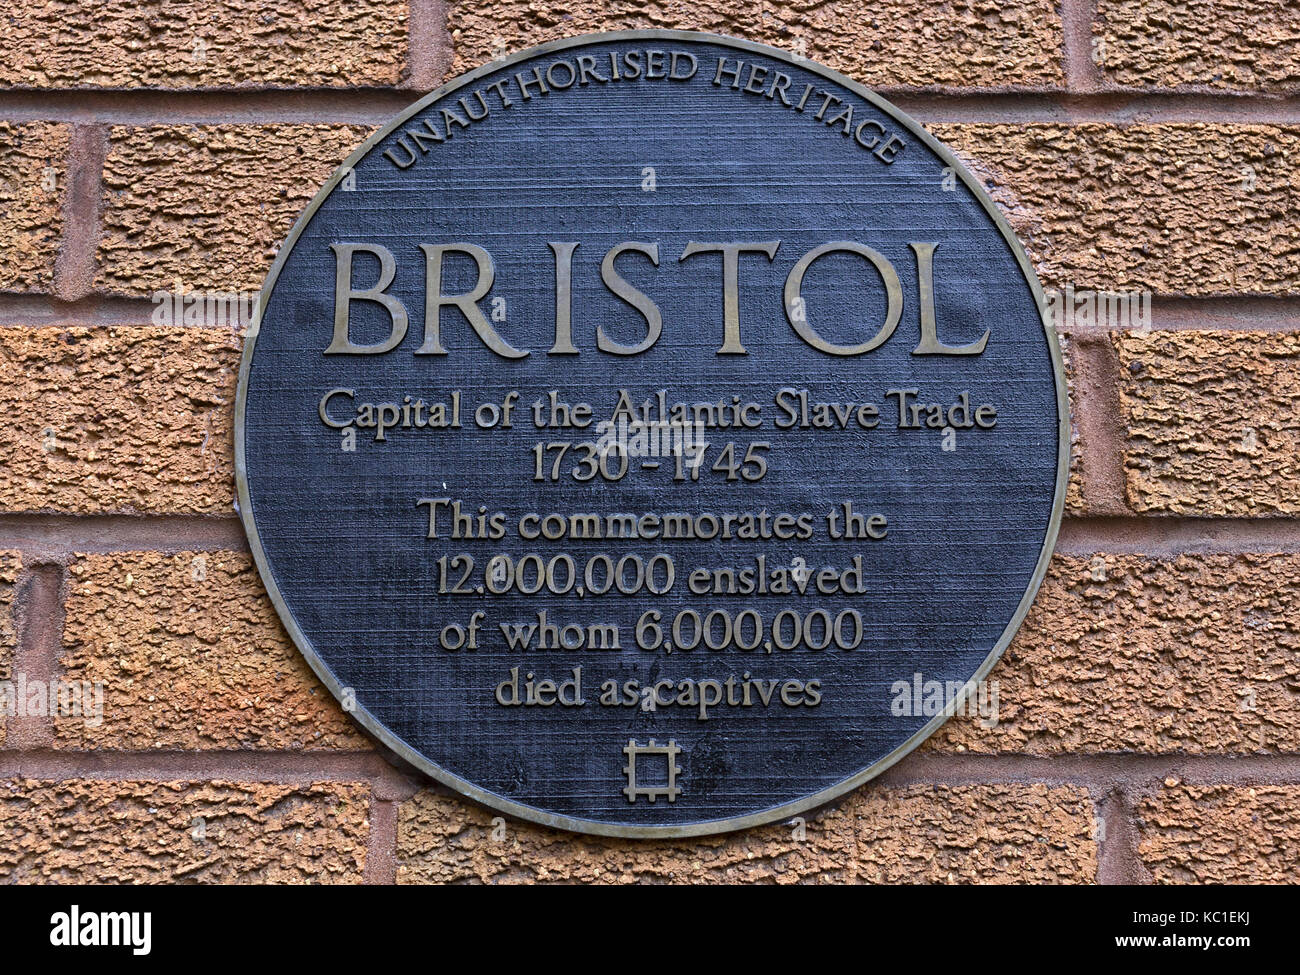 A plaque by artist Will Coles marking Bristol’s involvement in the Atlantic slave trade. It is similar to one placed on a statue of Edward Colston. Stock Photo